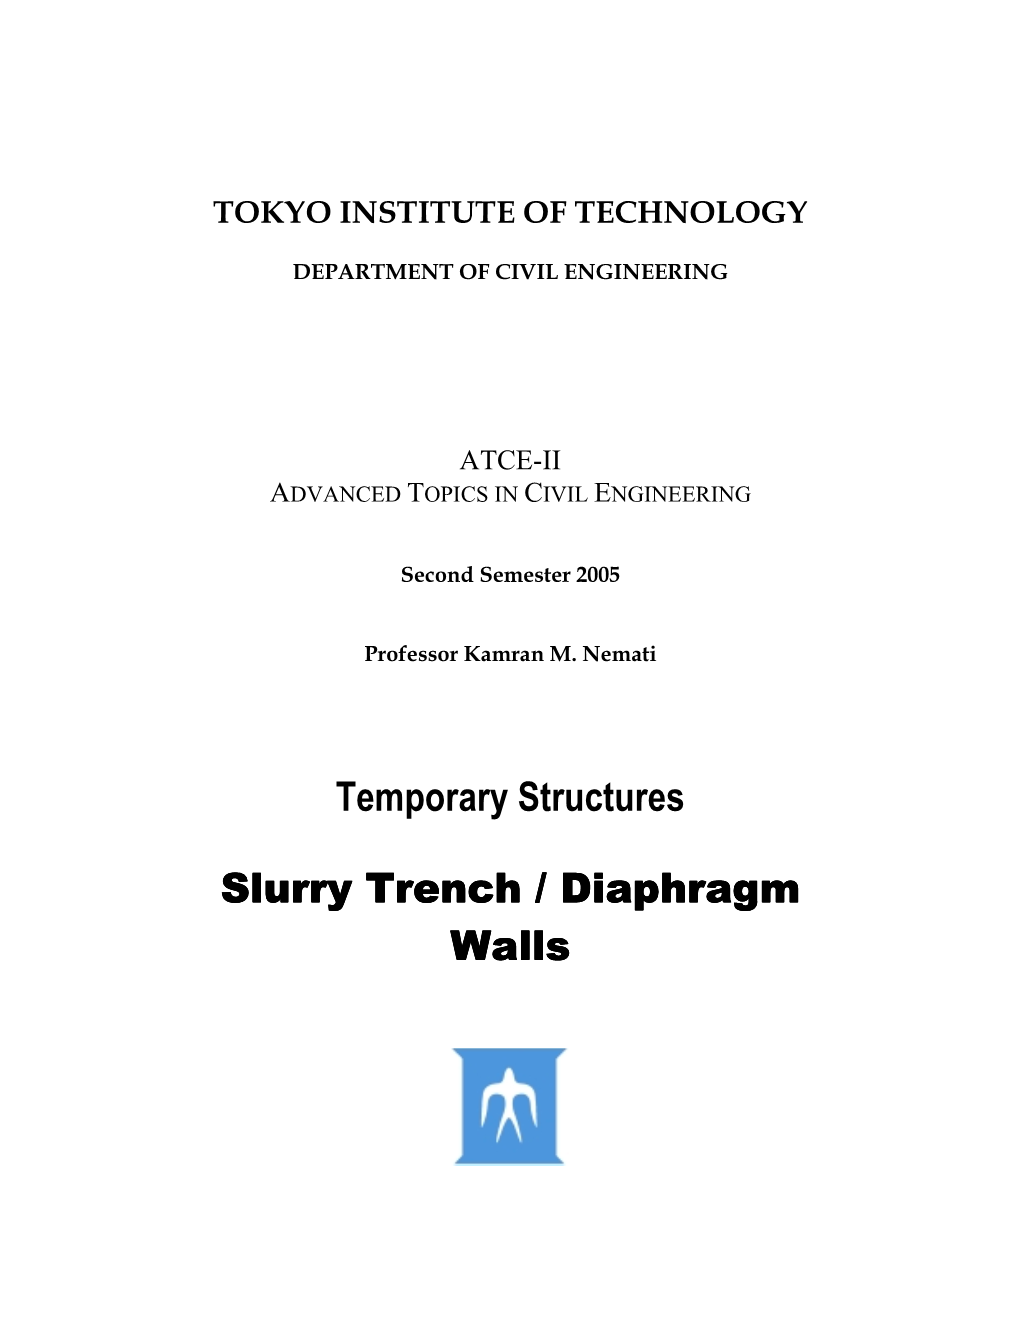 Temporary Structures Slurry Trench / Diaphragm Walls